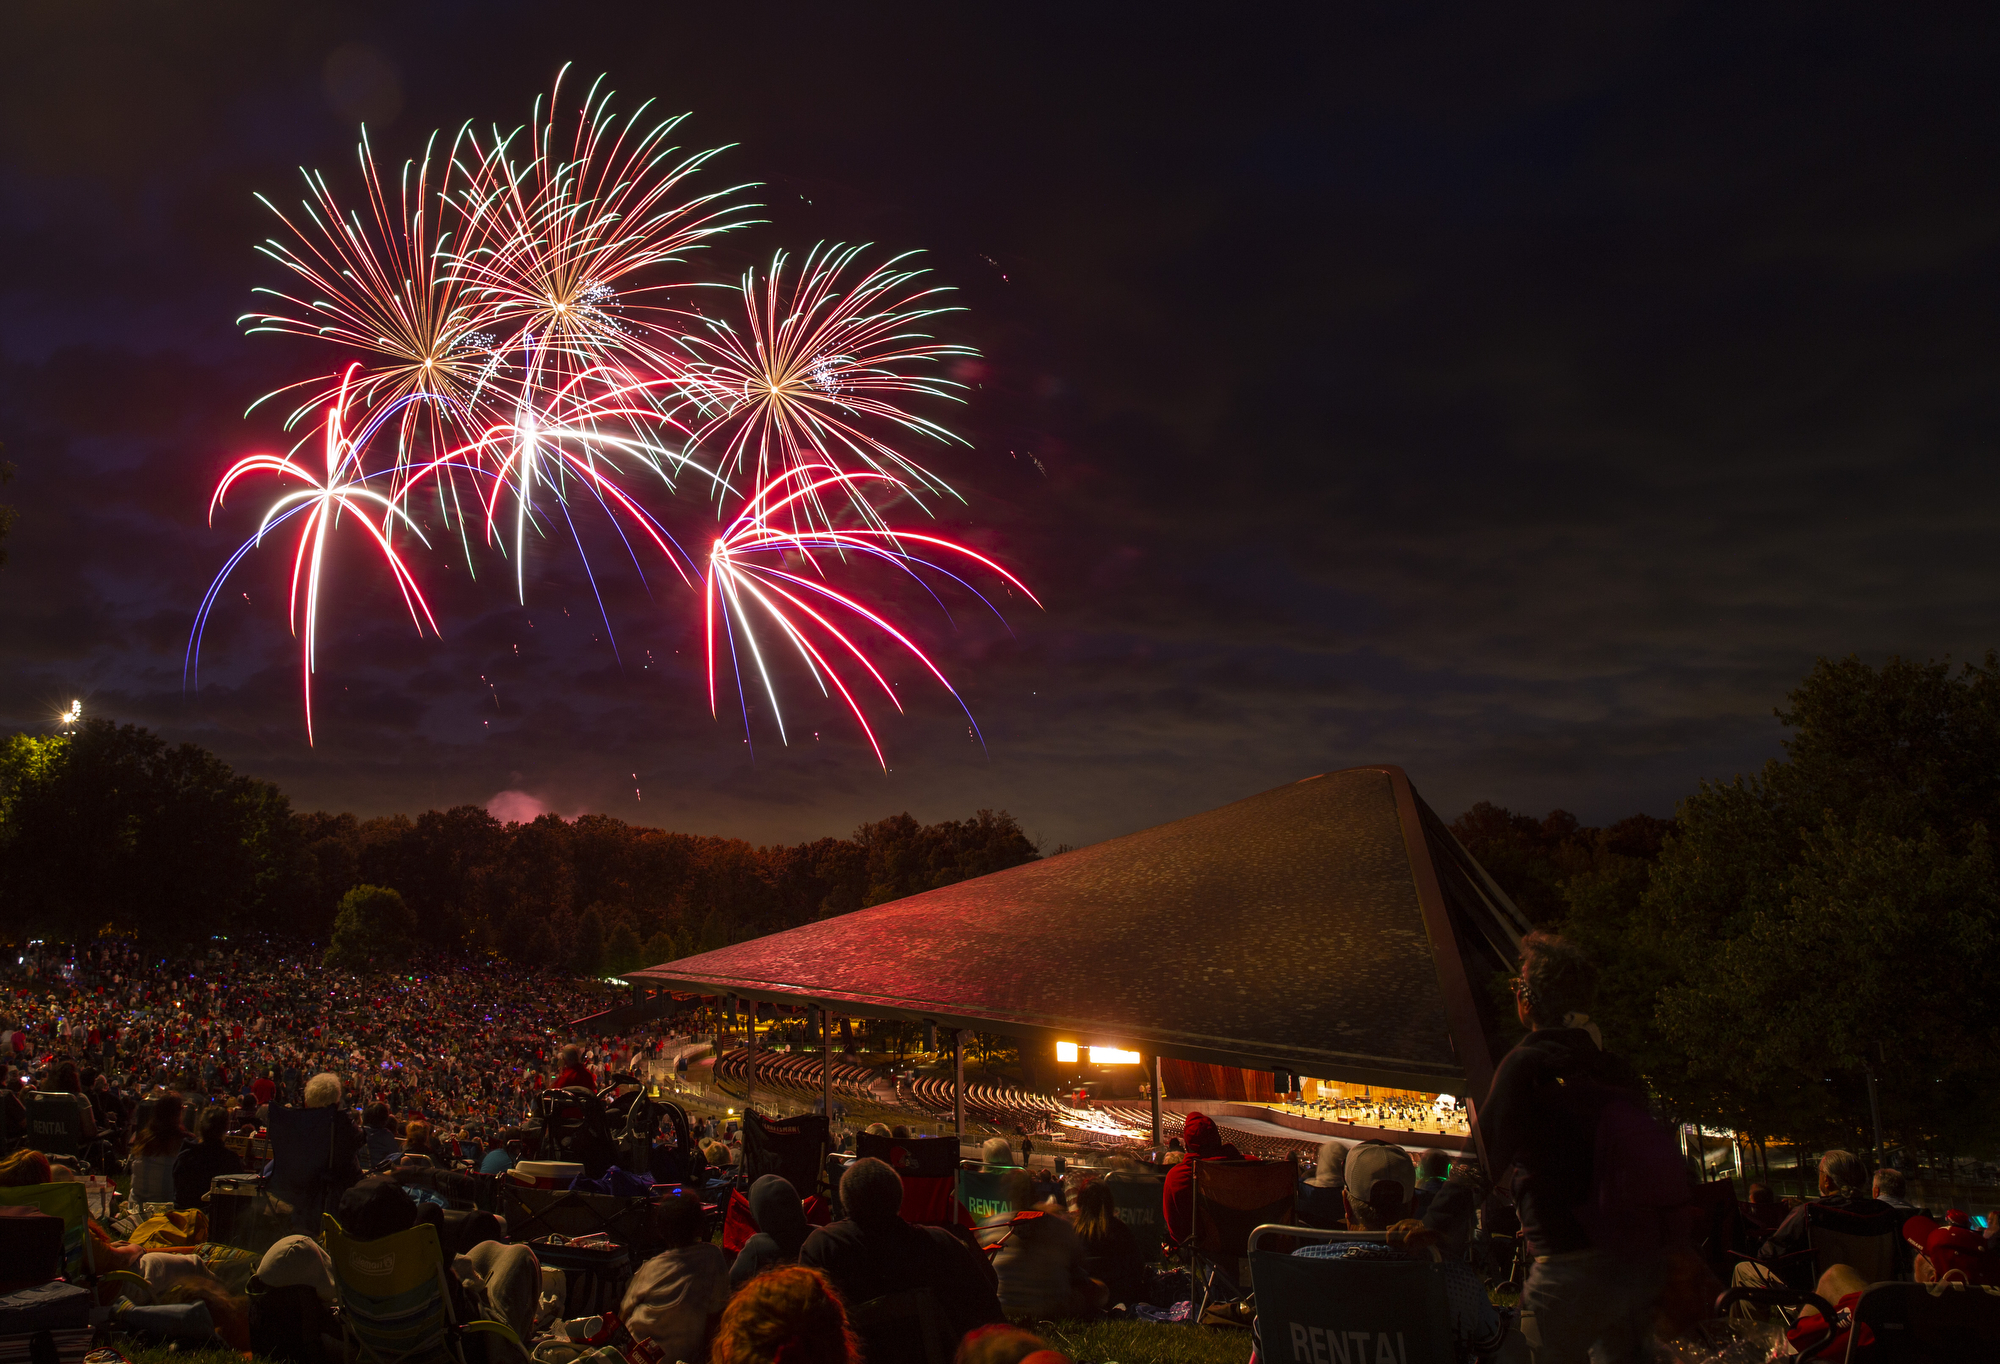 July 4th fireworks and events near me in Youngstown Ohio